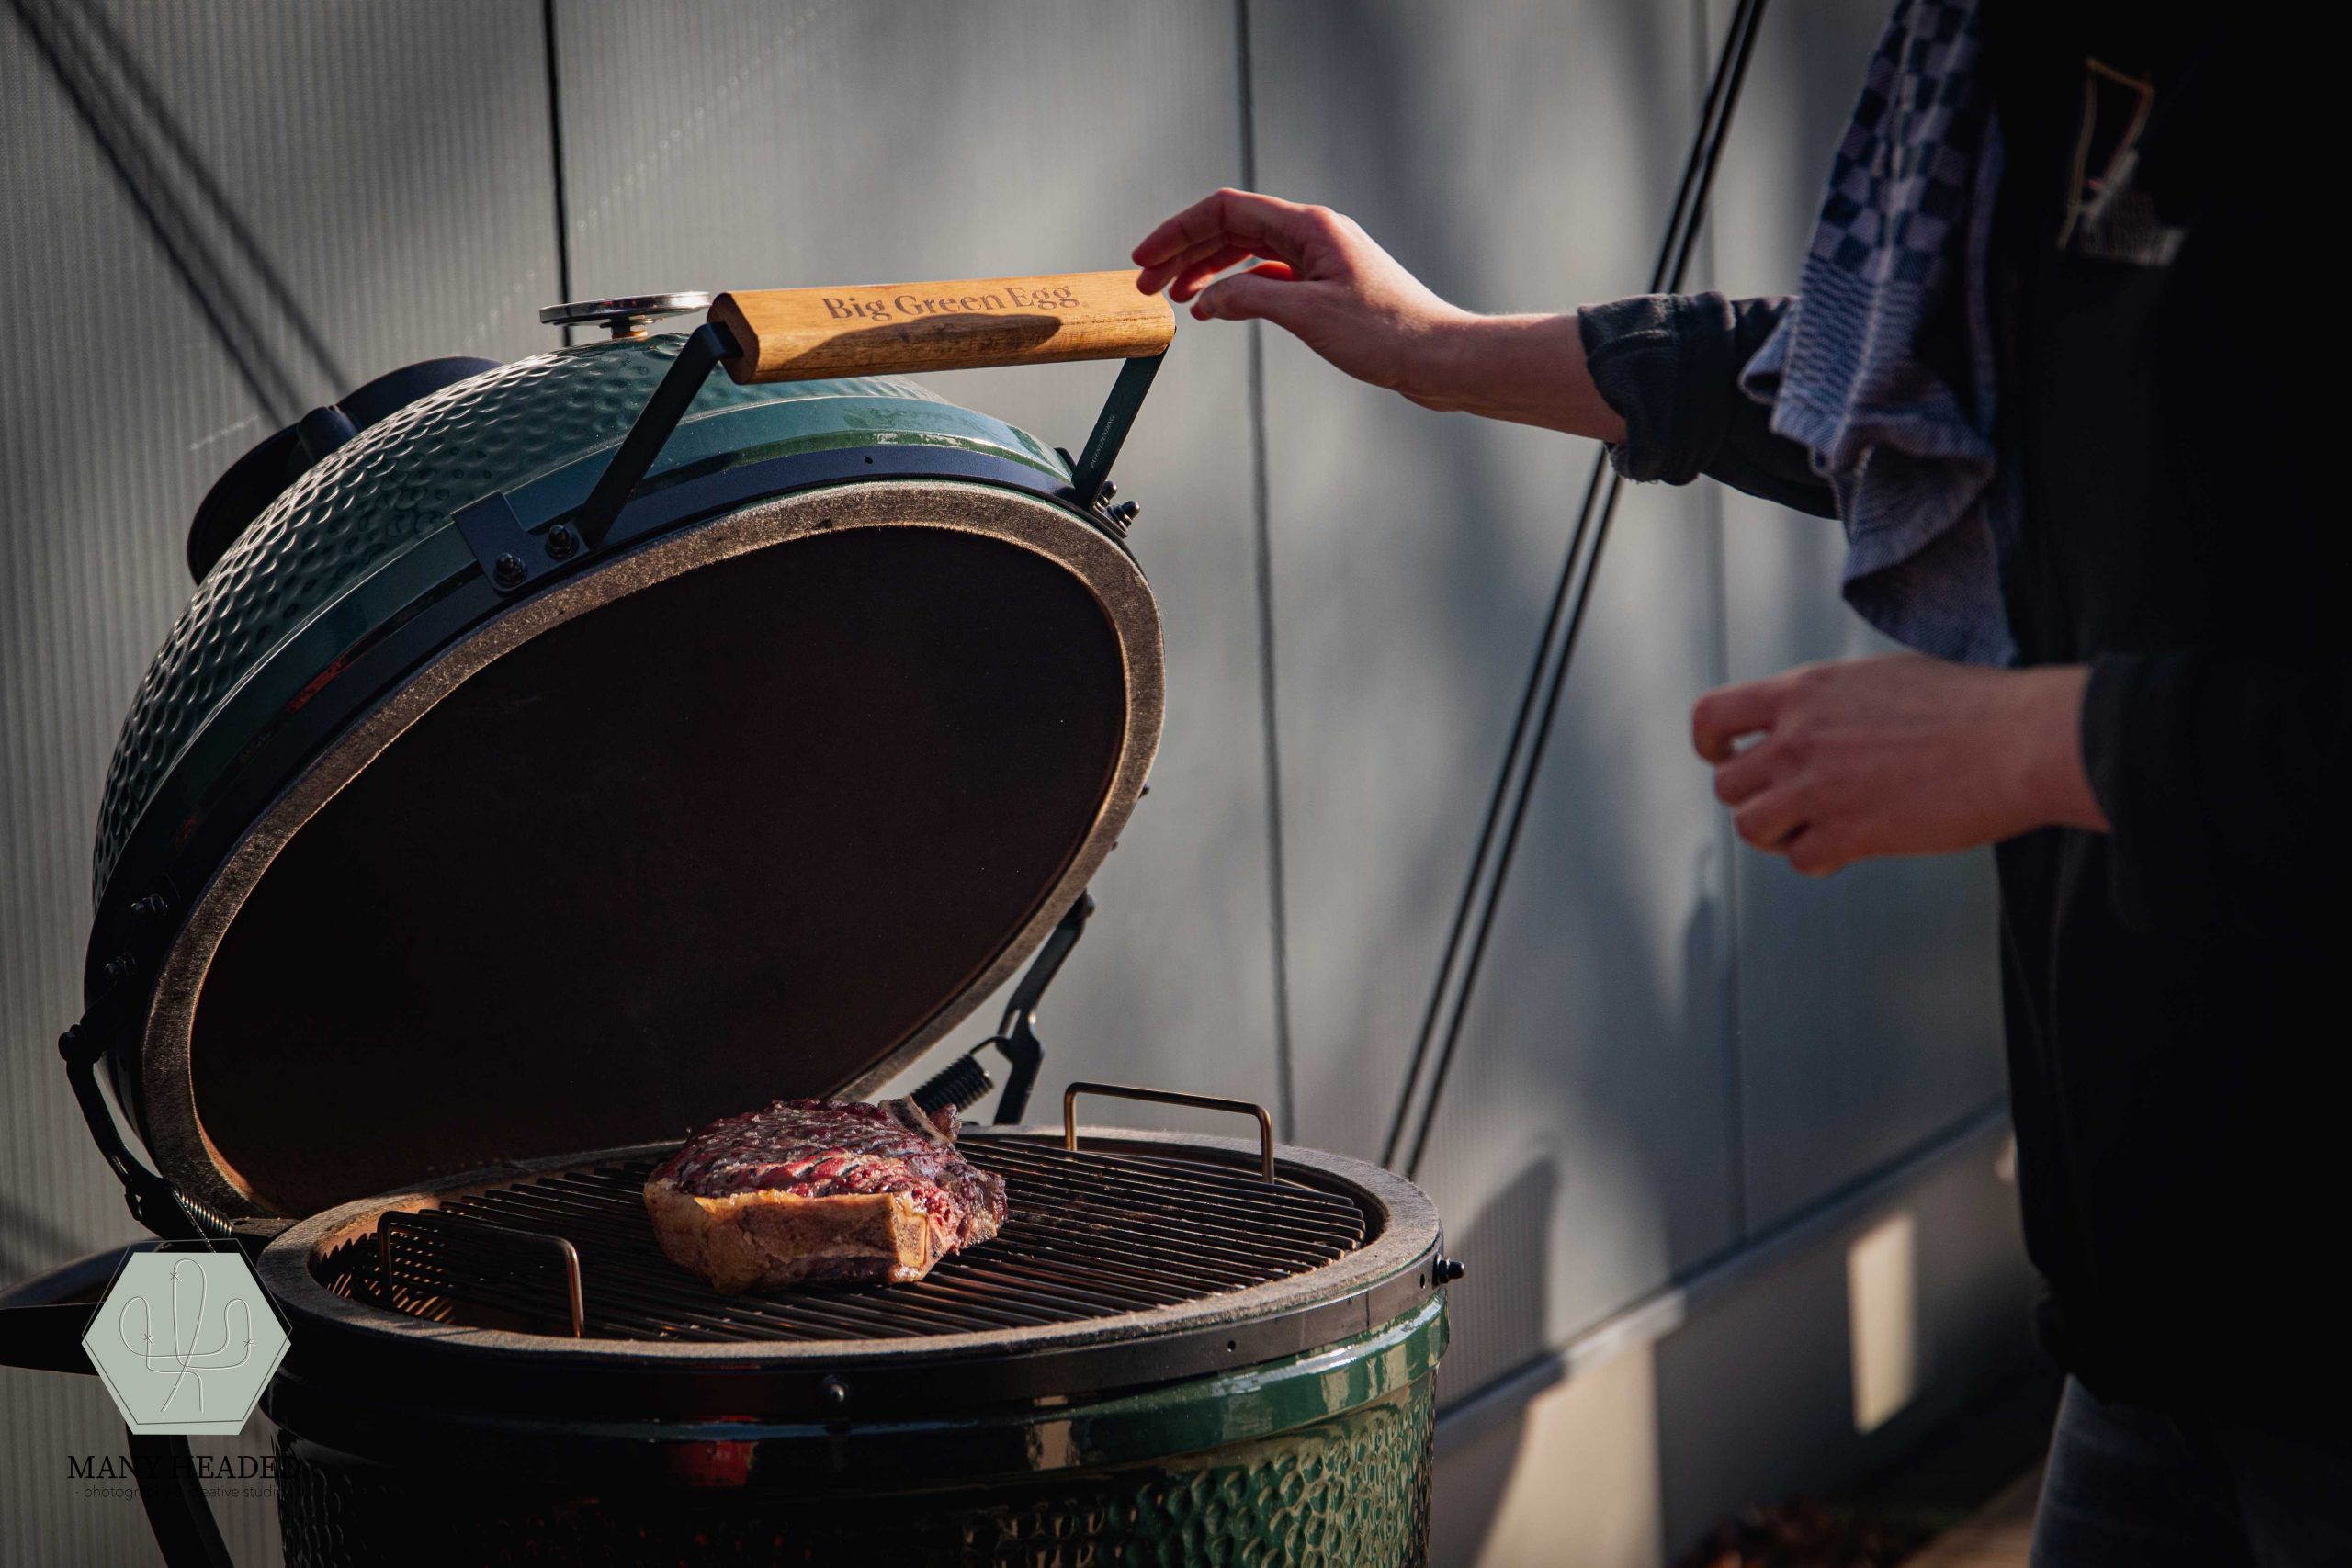 Start To Grill &#8211; The next steps